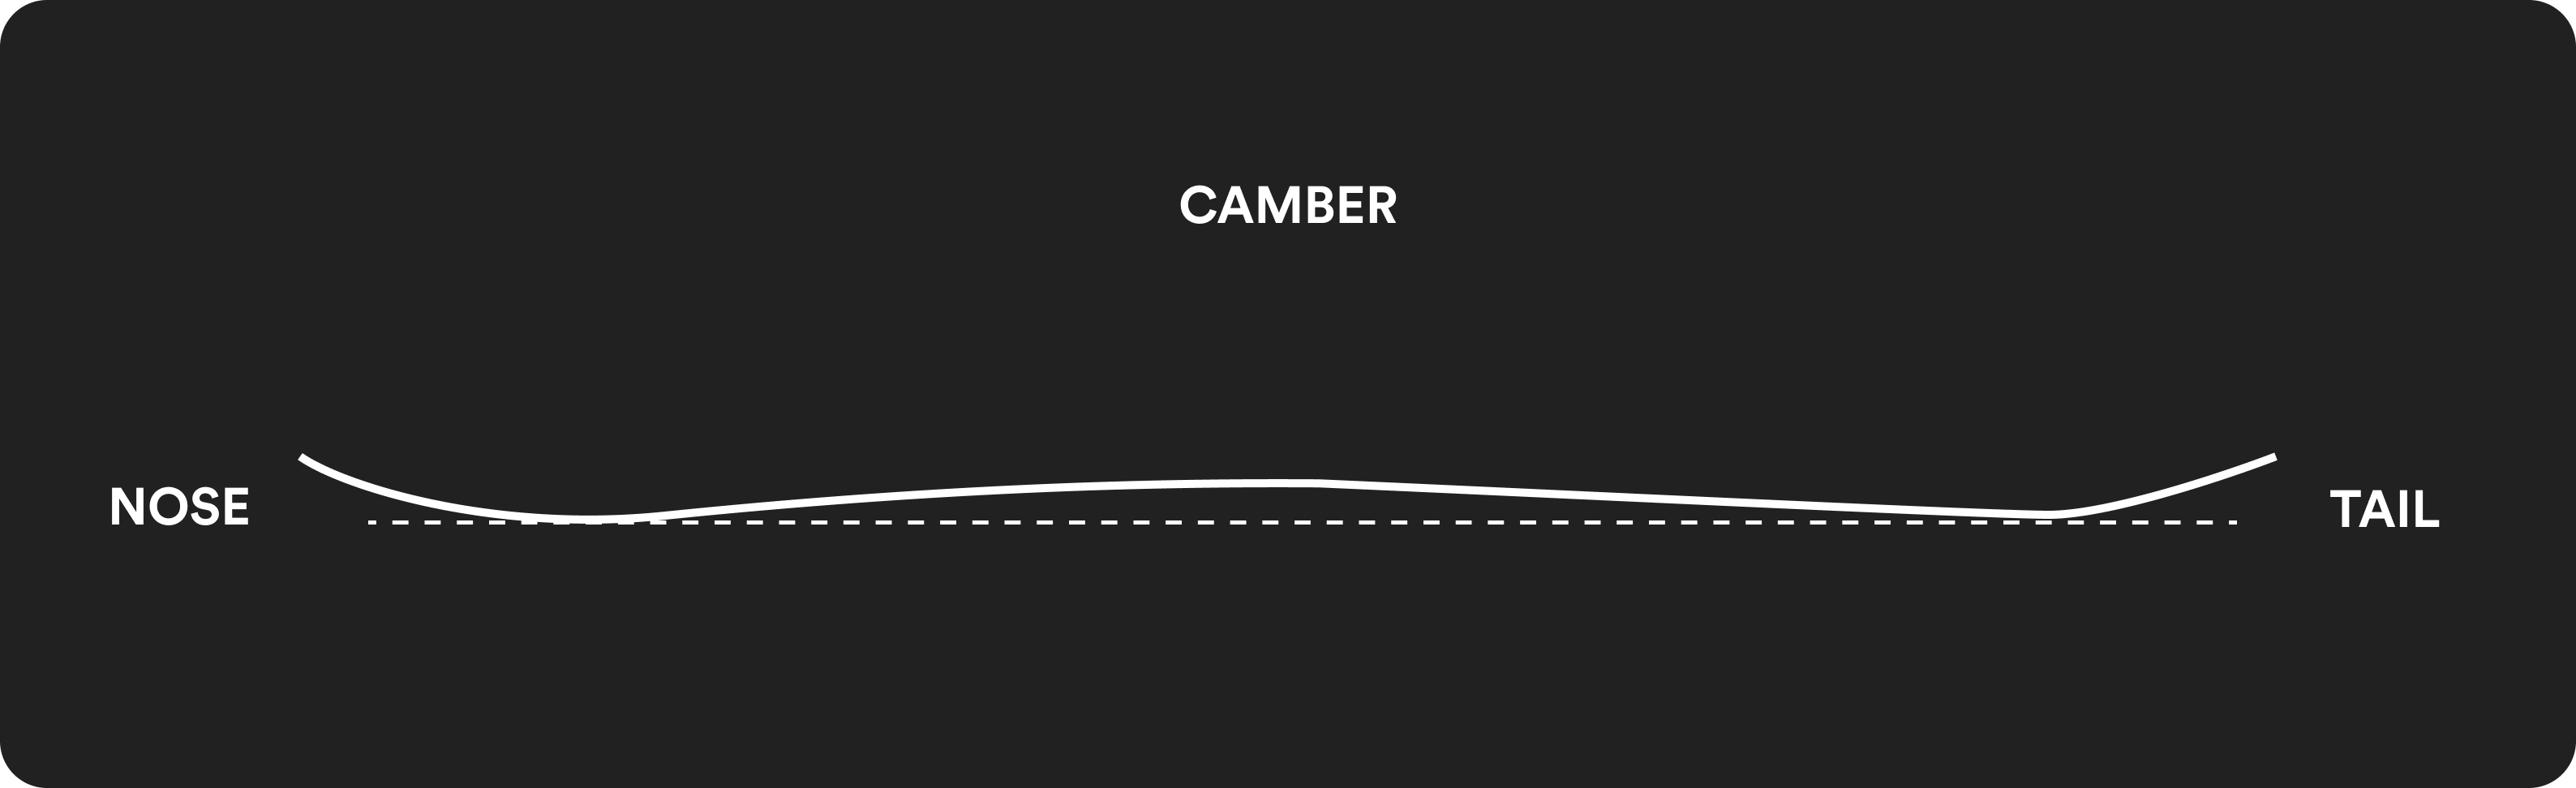 A graphic showing the profile shape of a traditional camber board. 